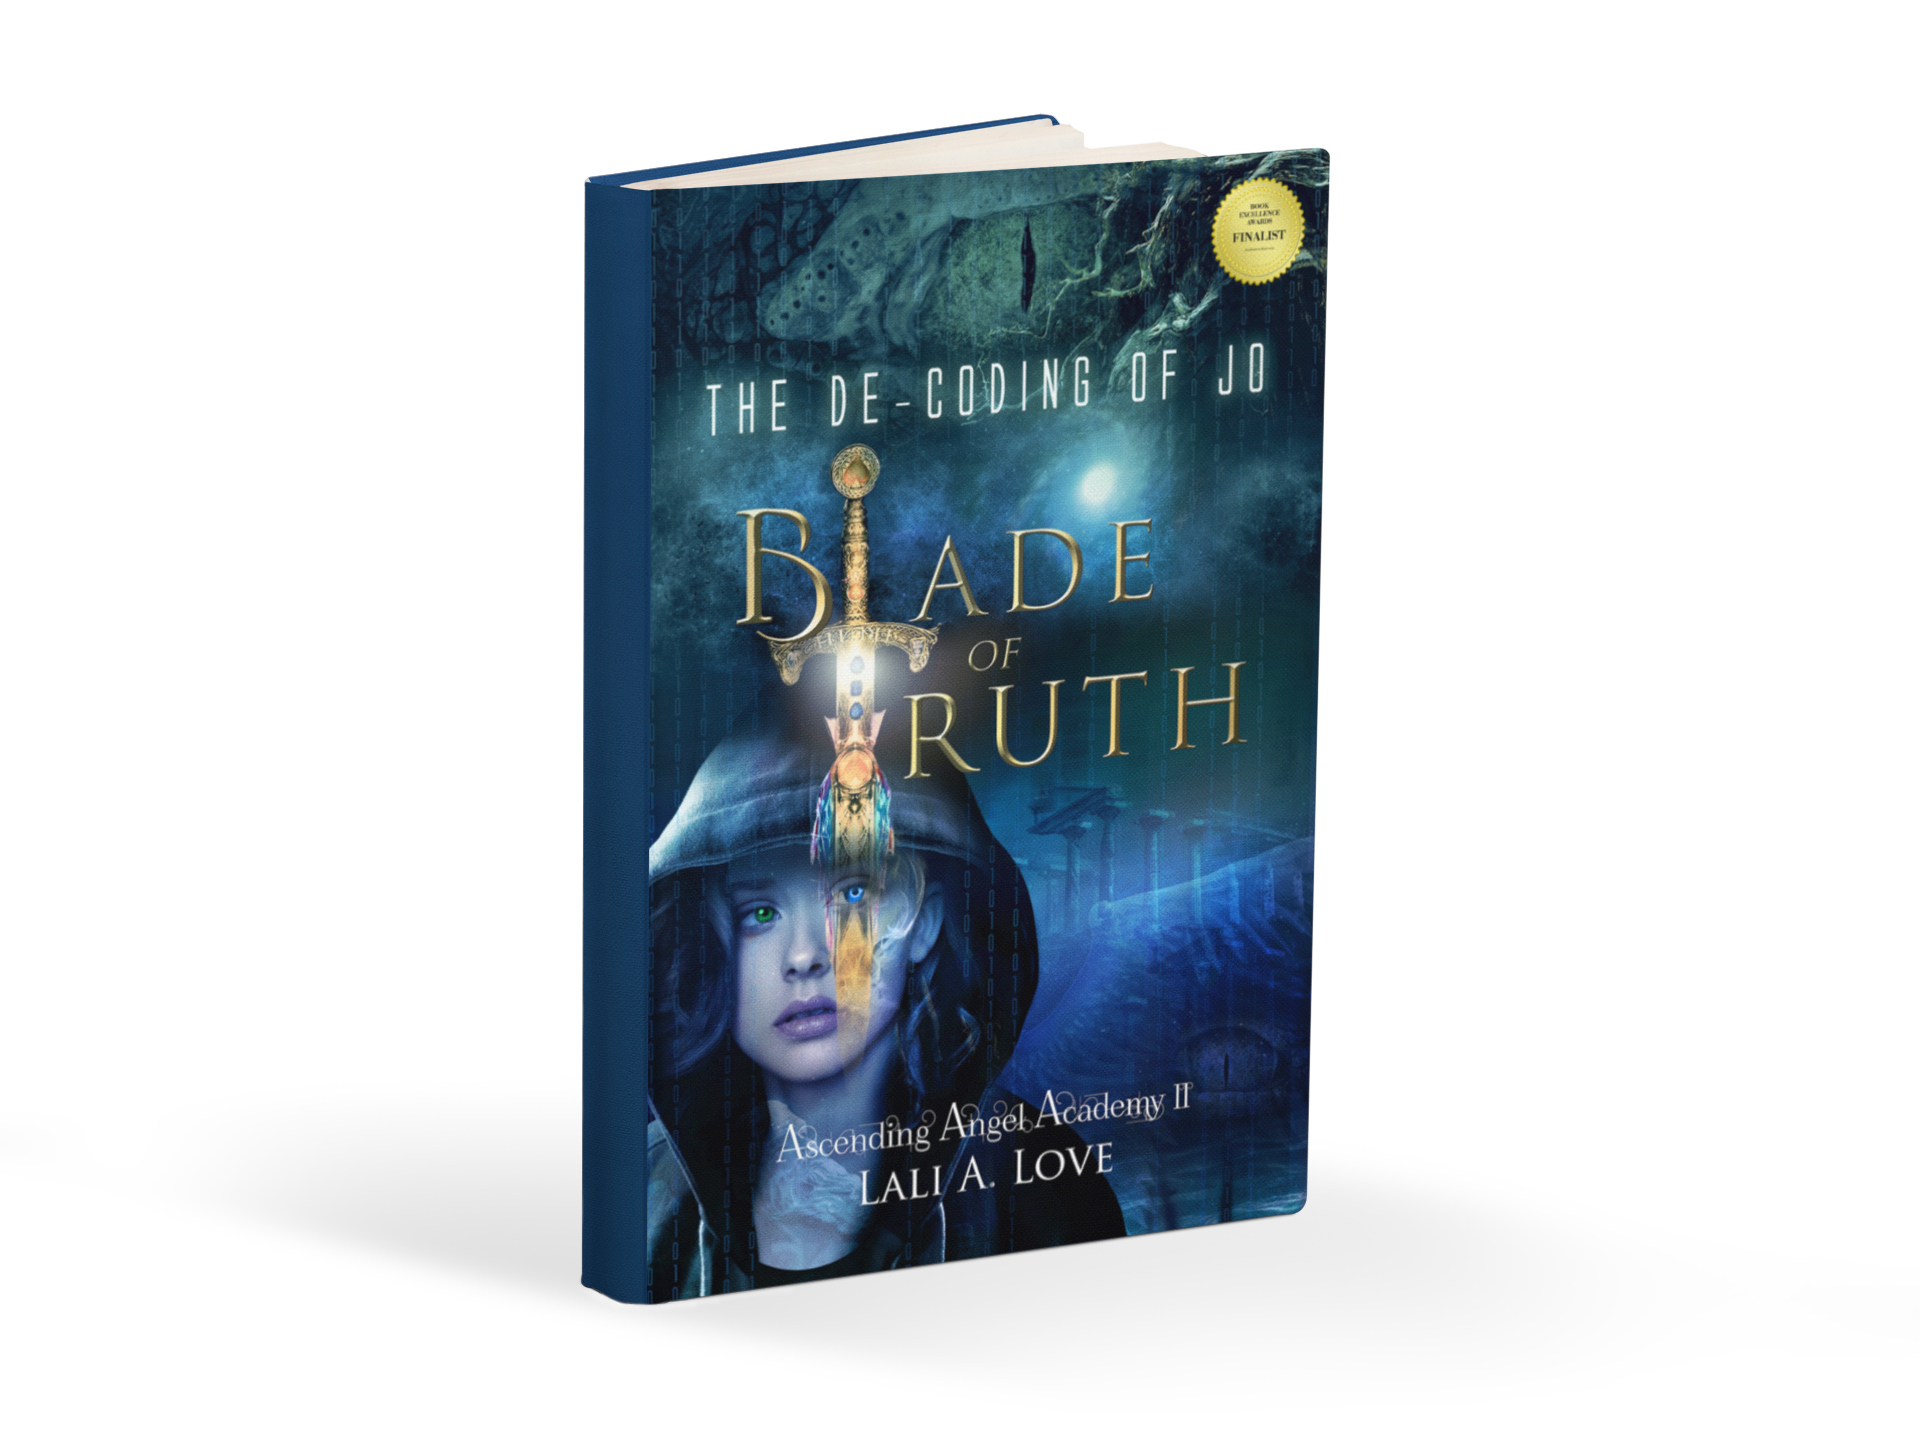 Lali A. Love, Author of The De-Coding of Jo: Blade of Truth, Honored as a Finalist in Top Book Award